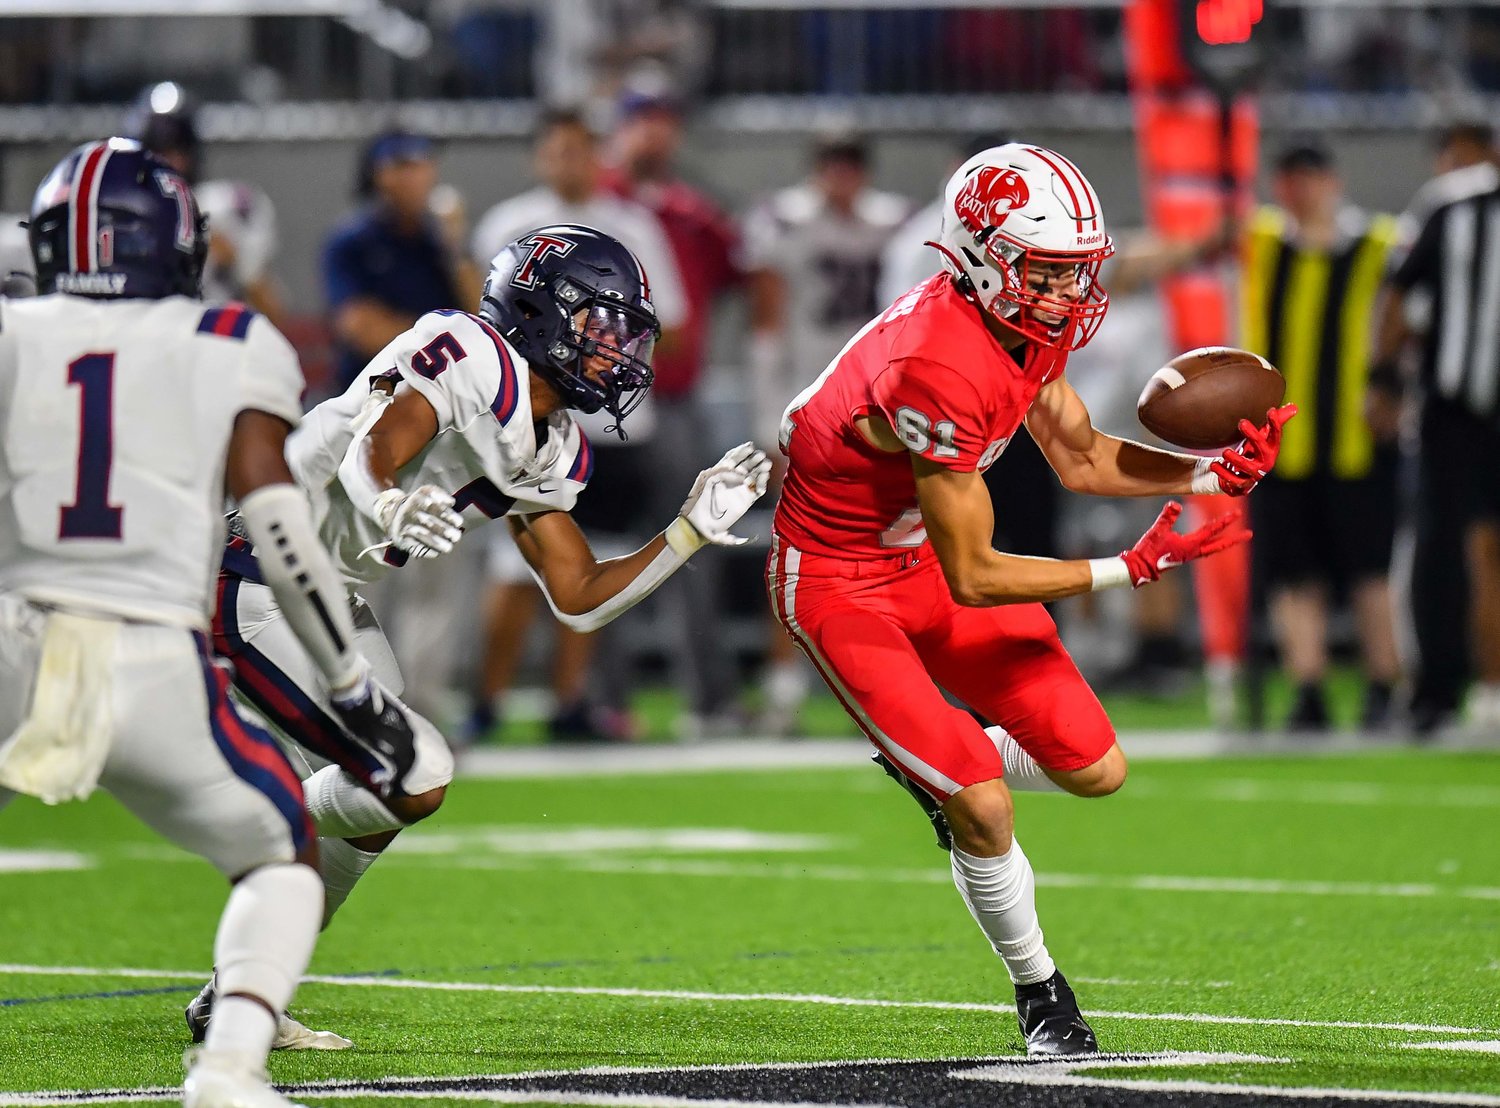 Katy, Tx. Oct 1, 2021:  Katy's #81 Jr Ceyanes makes the reception during a conference game between Katy Tigers and Tompkins Falcons at Legacy Stadium. (Photo by Mark Goodman / Katy Times)